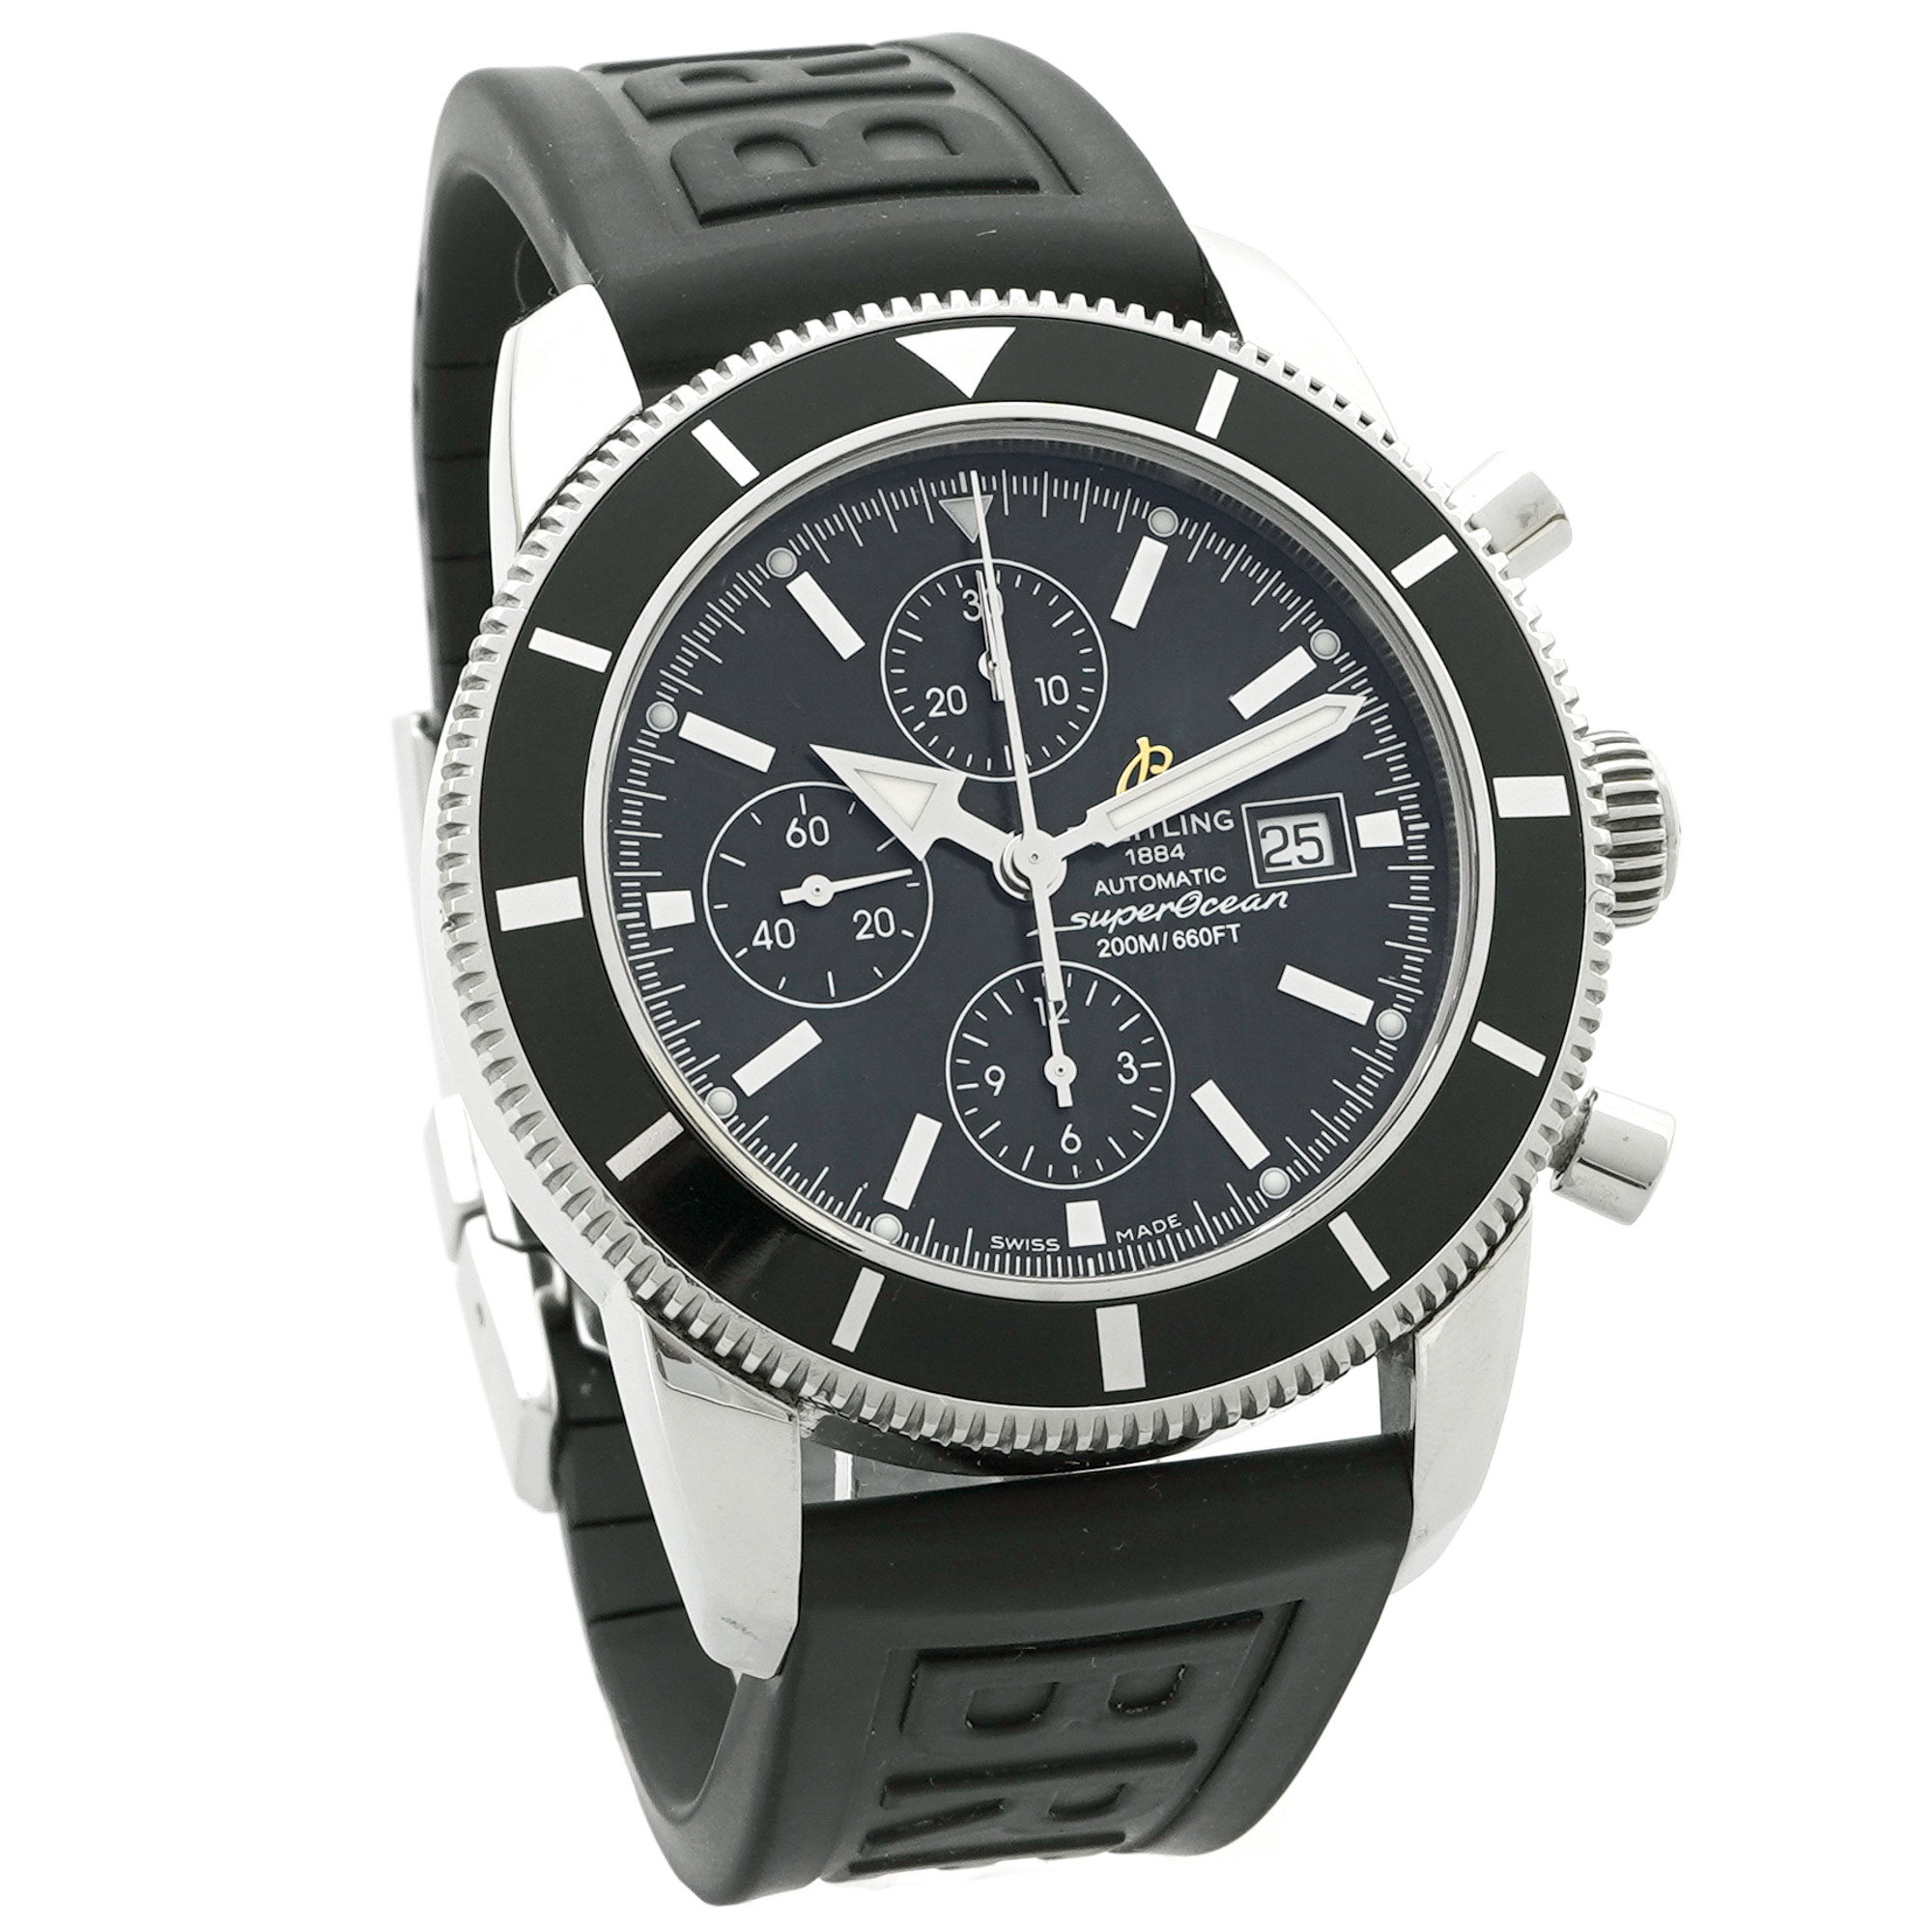 Breitling SuperOcean Heritage Chronograph A13320 - Inventory 4793